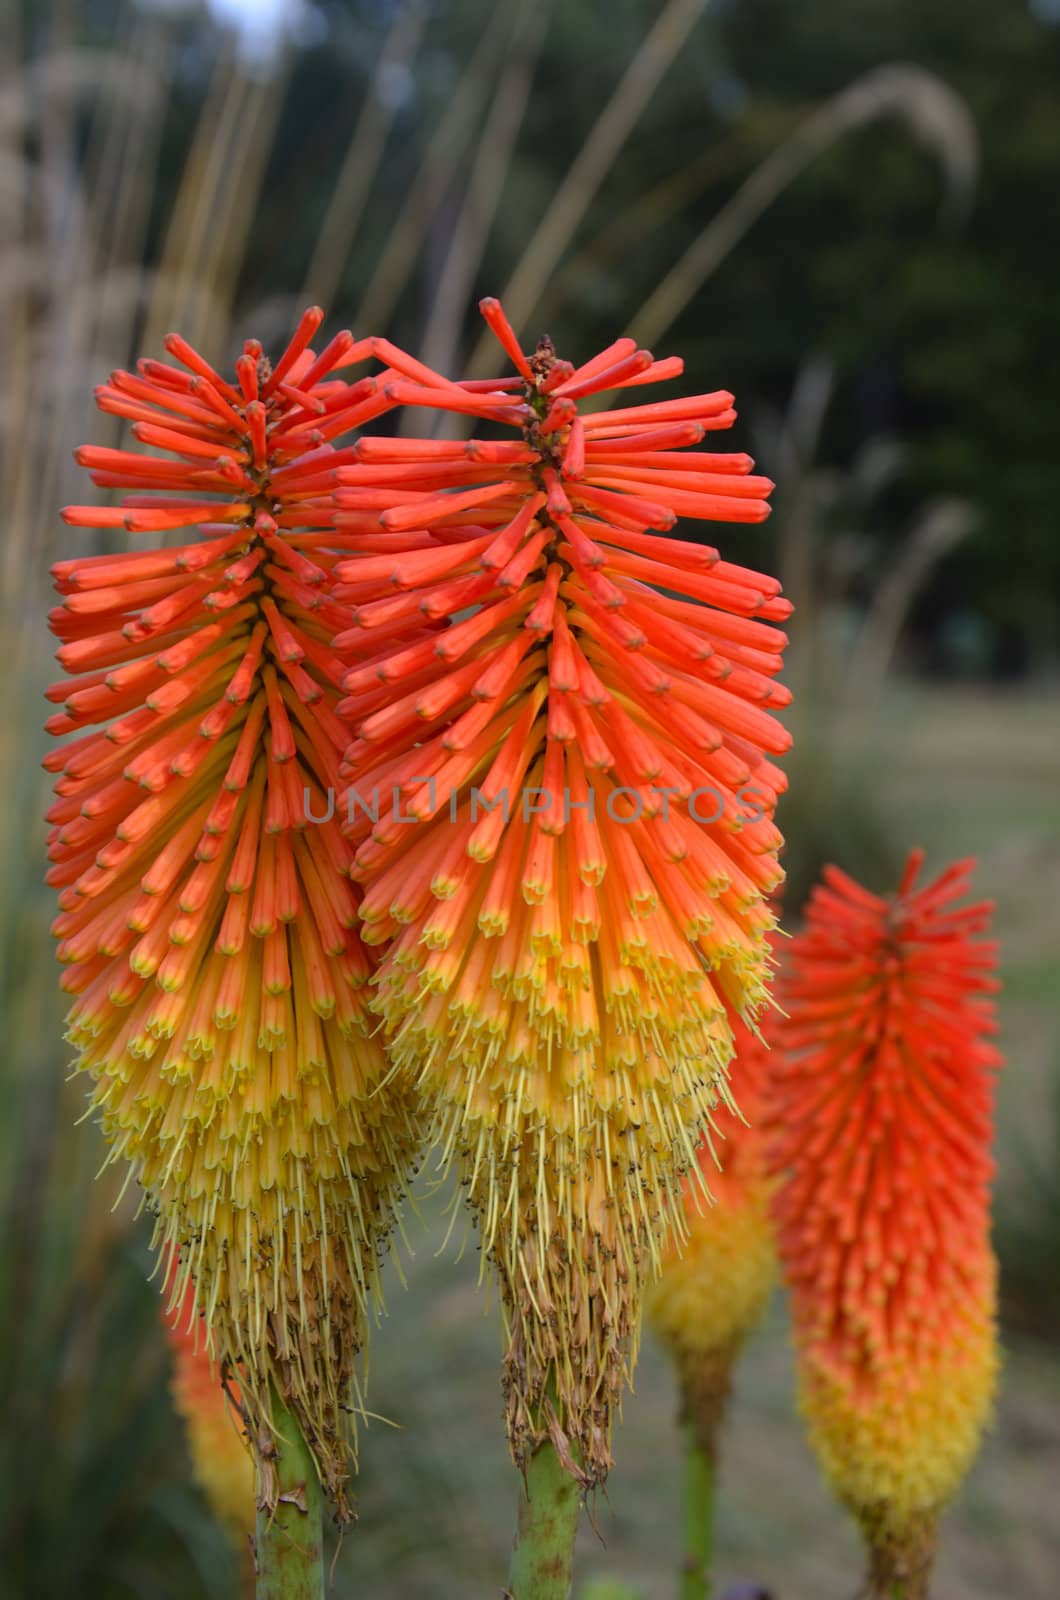 red hot pokers in close up by pauws99